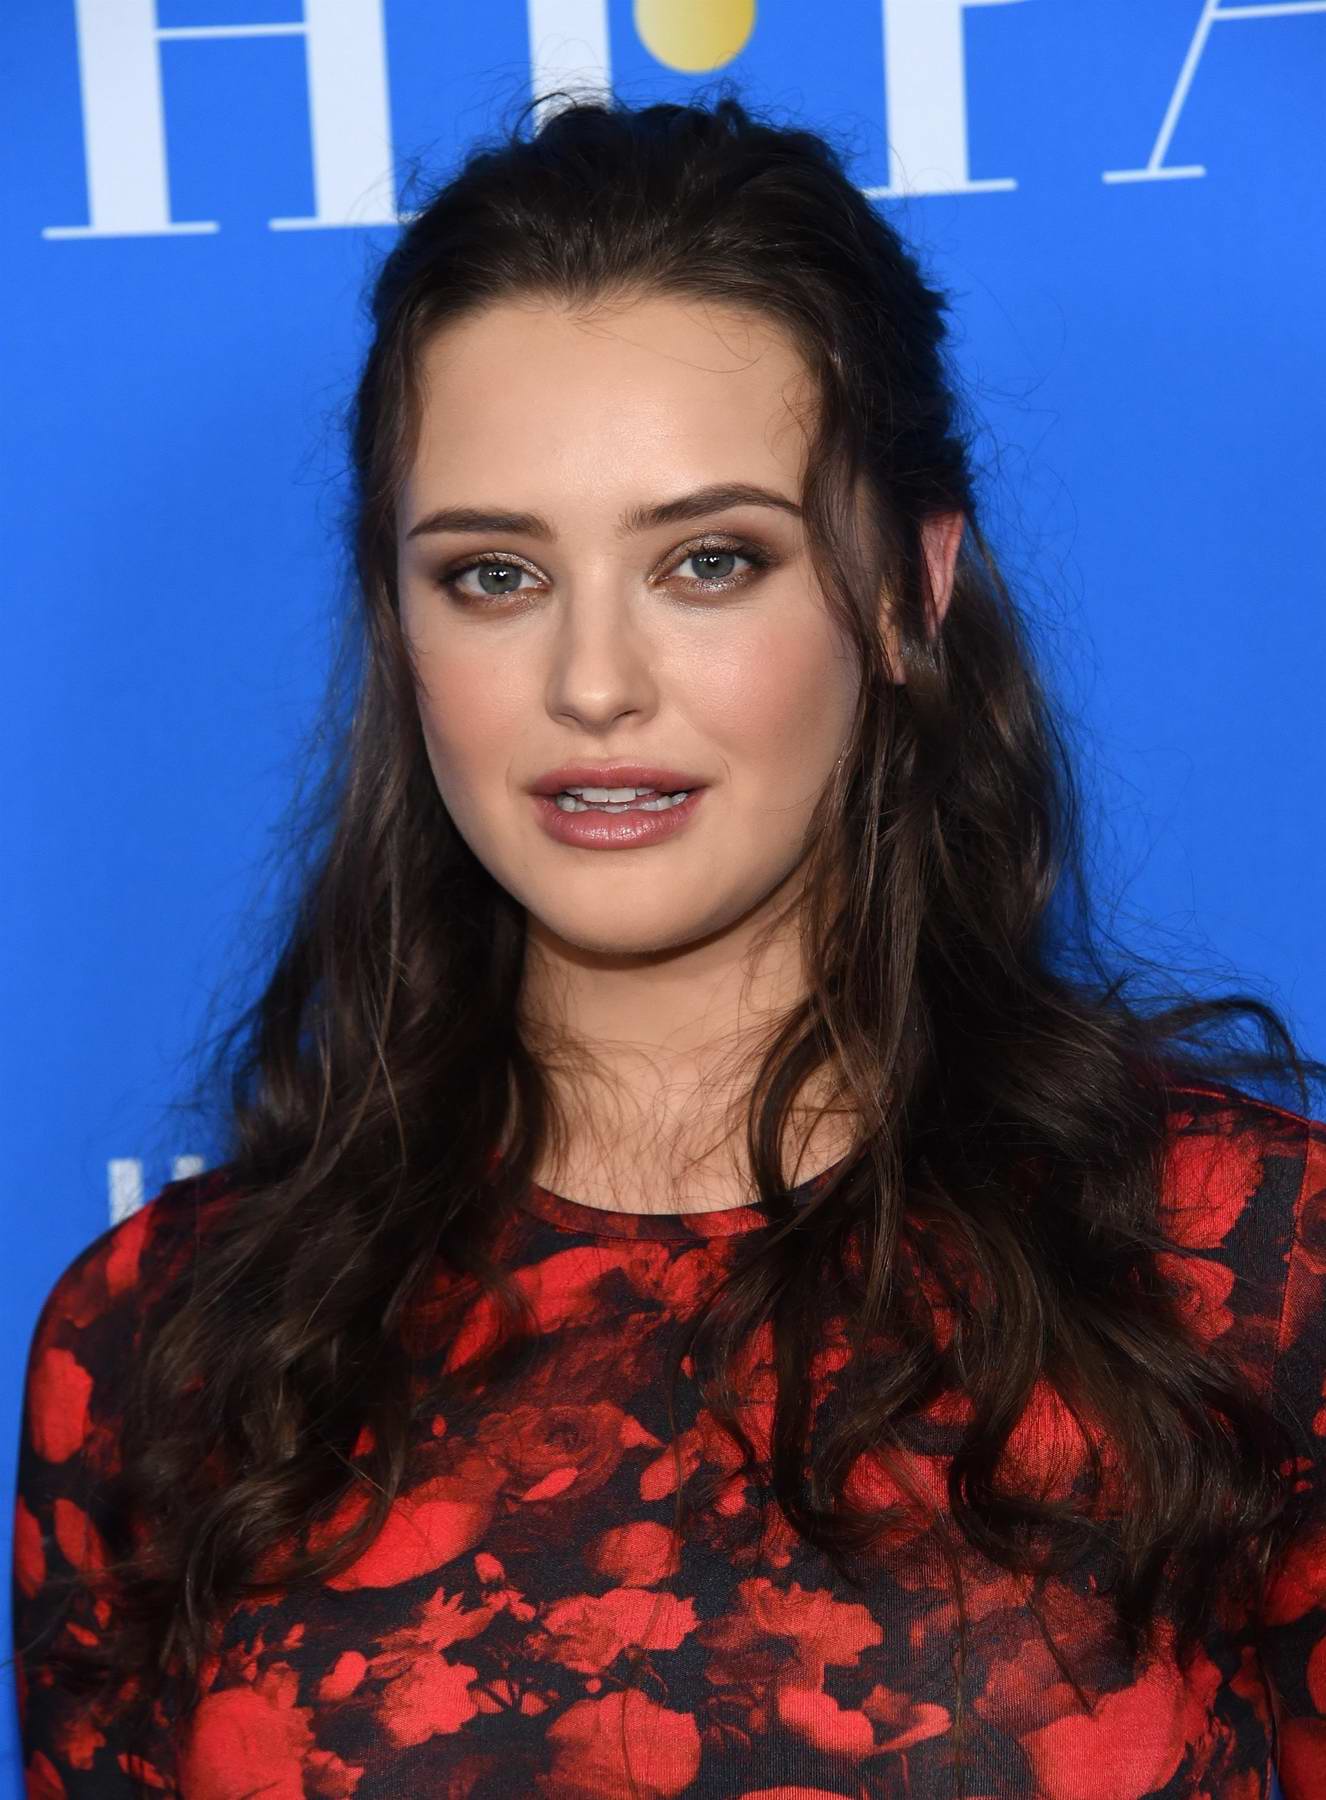 katherine langford attends hfpa grants banquet in los angeles-020817_6